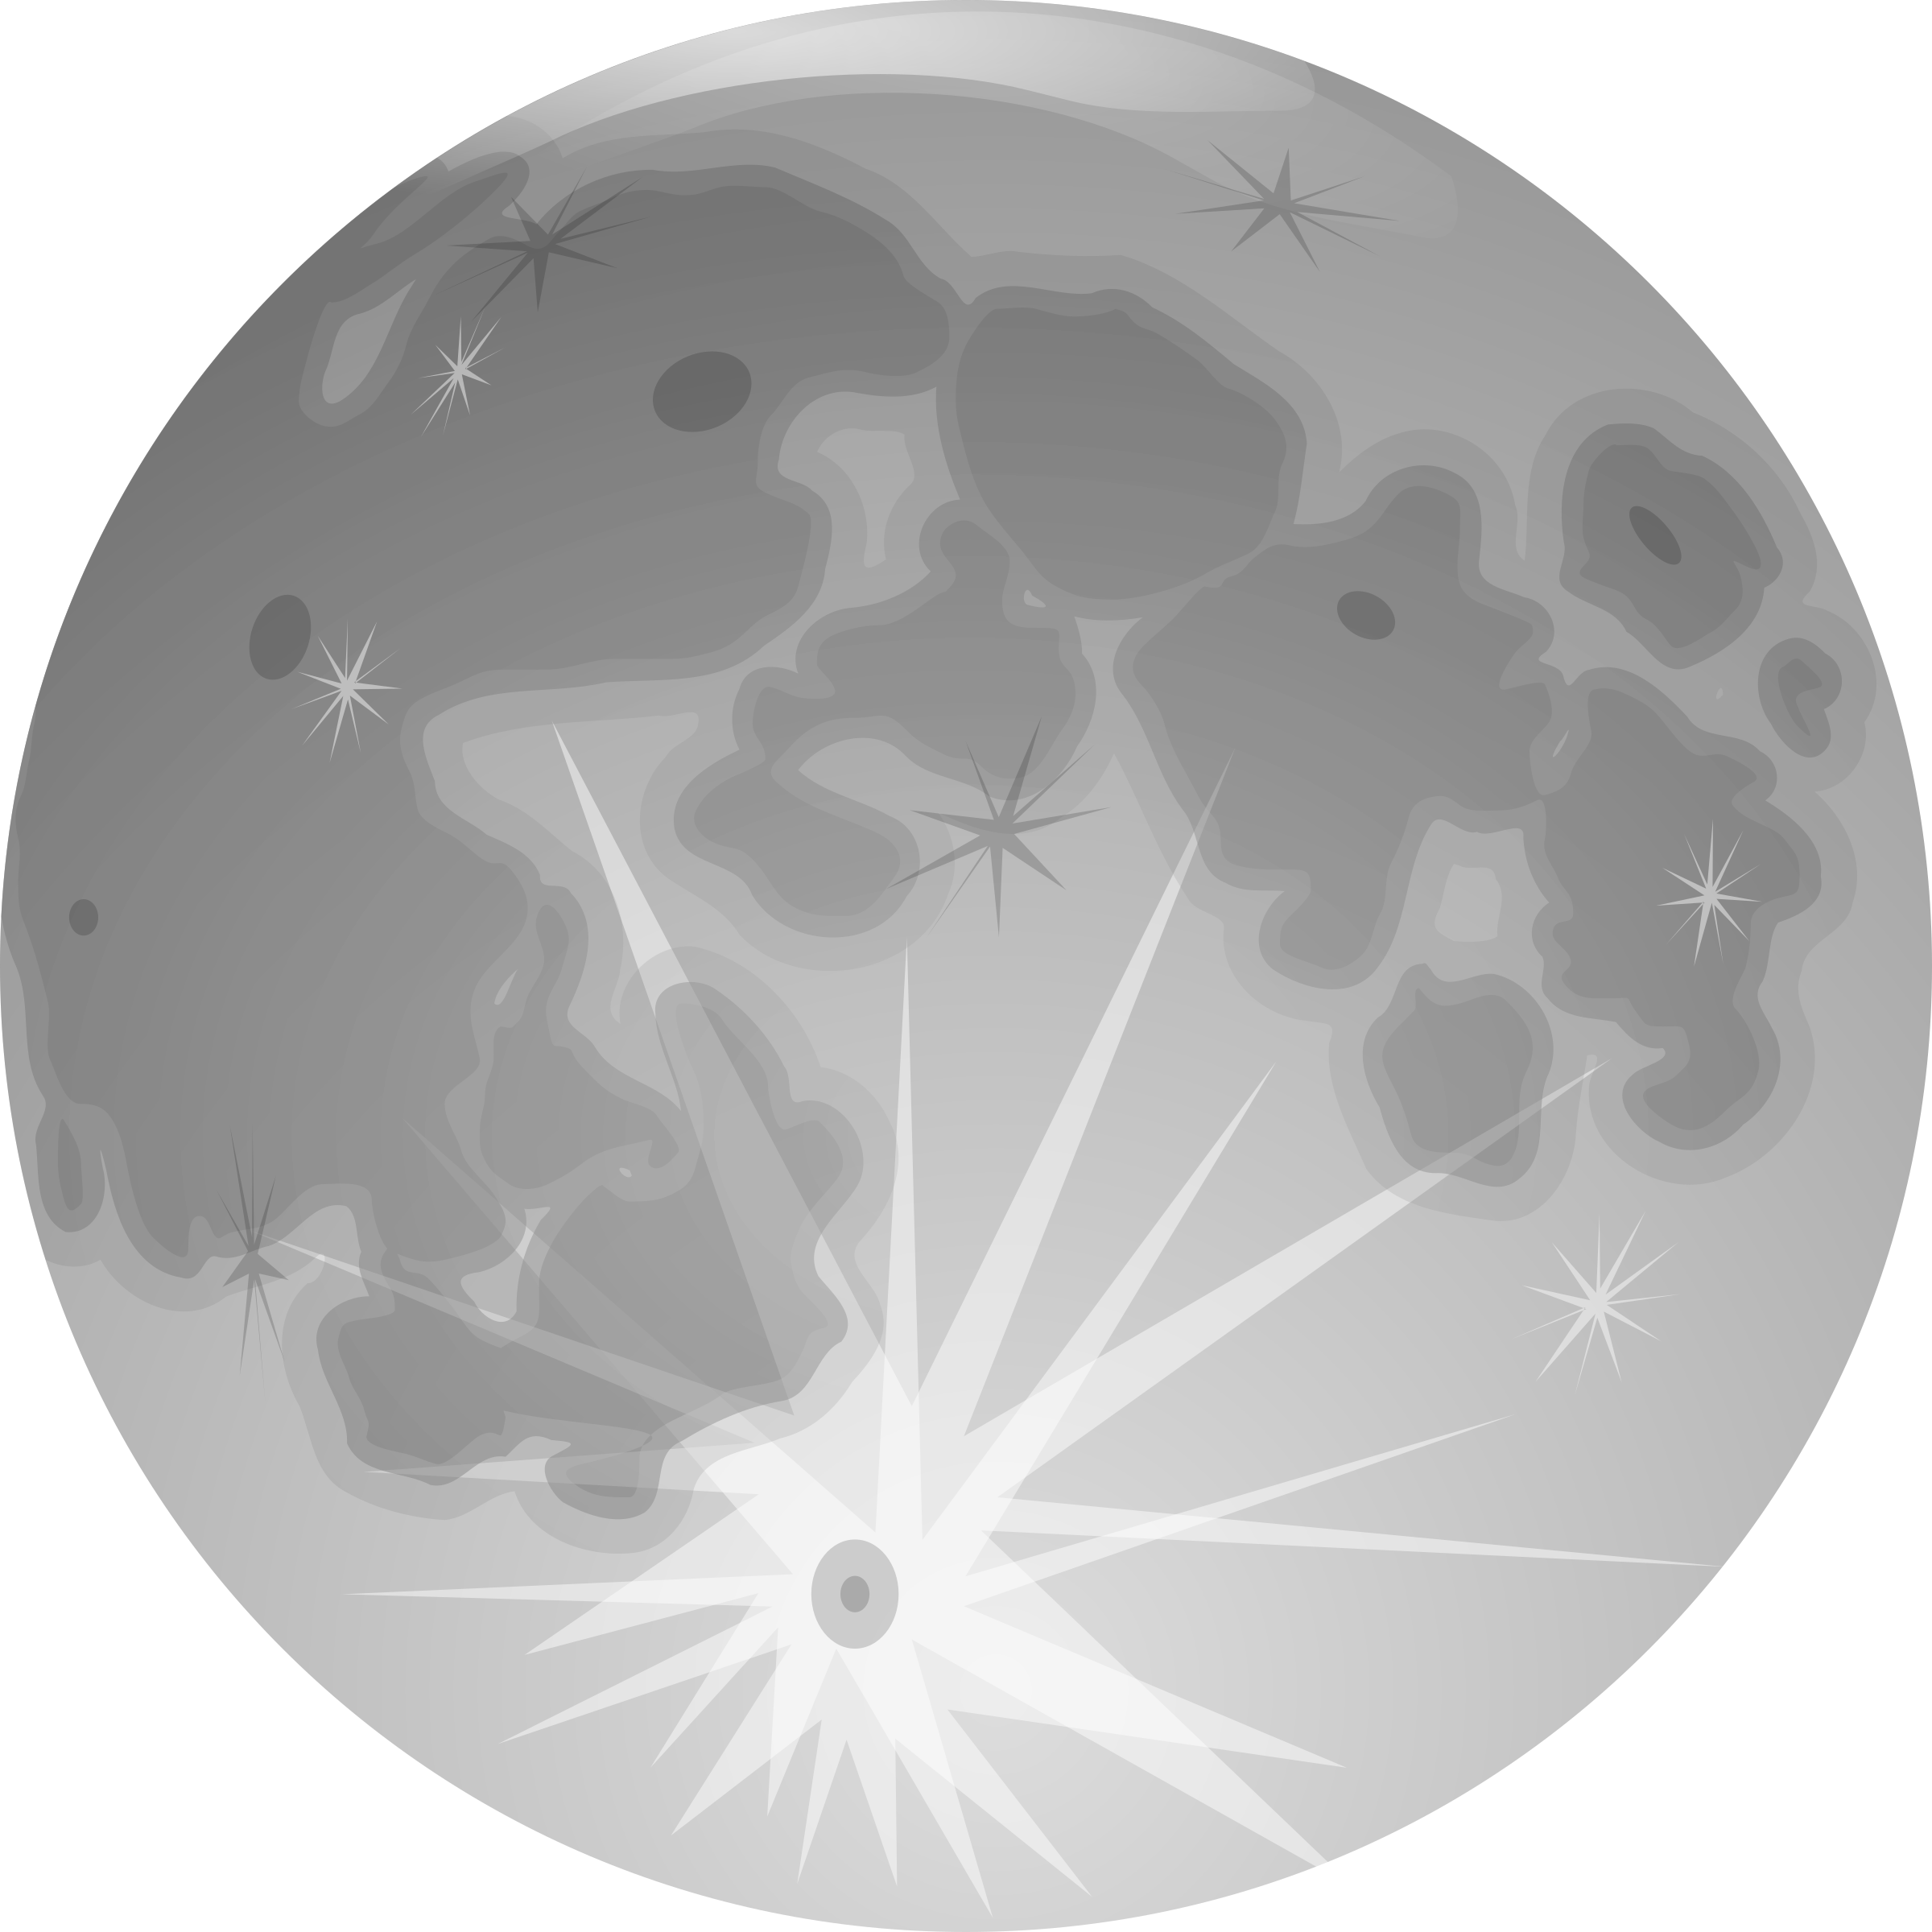 Png image purepng transparent. Clipart free moon